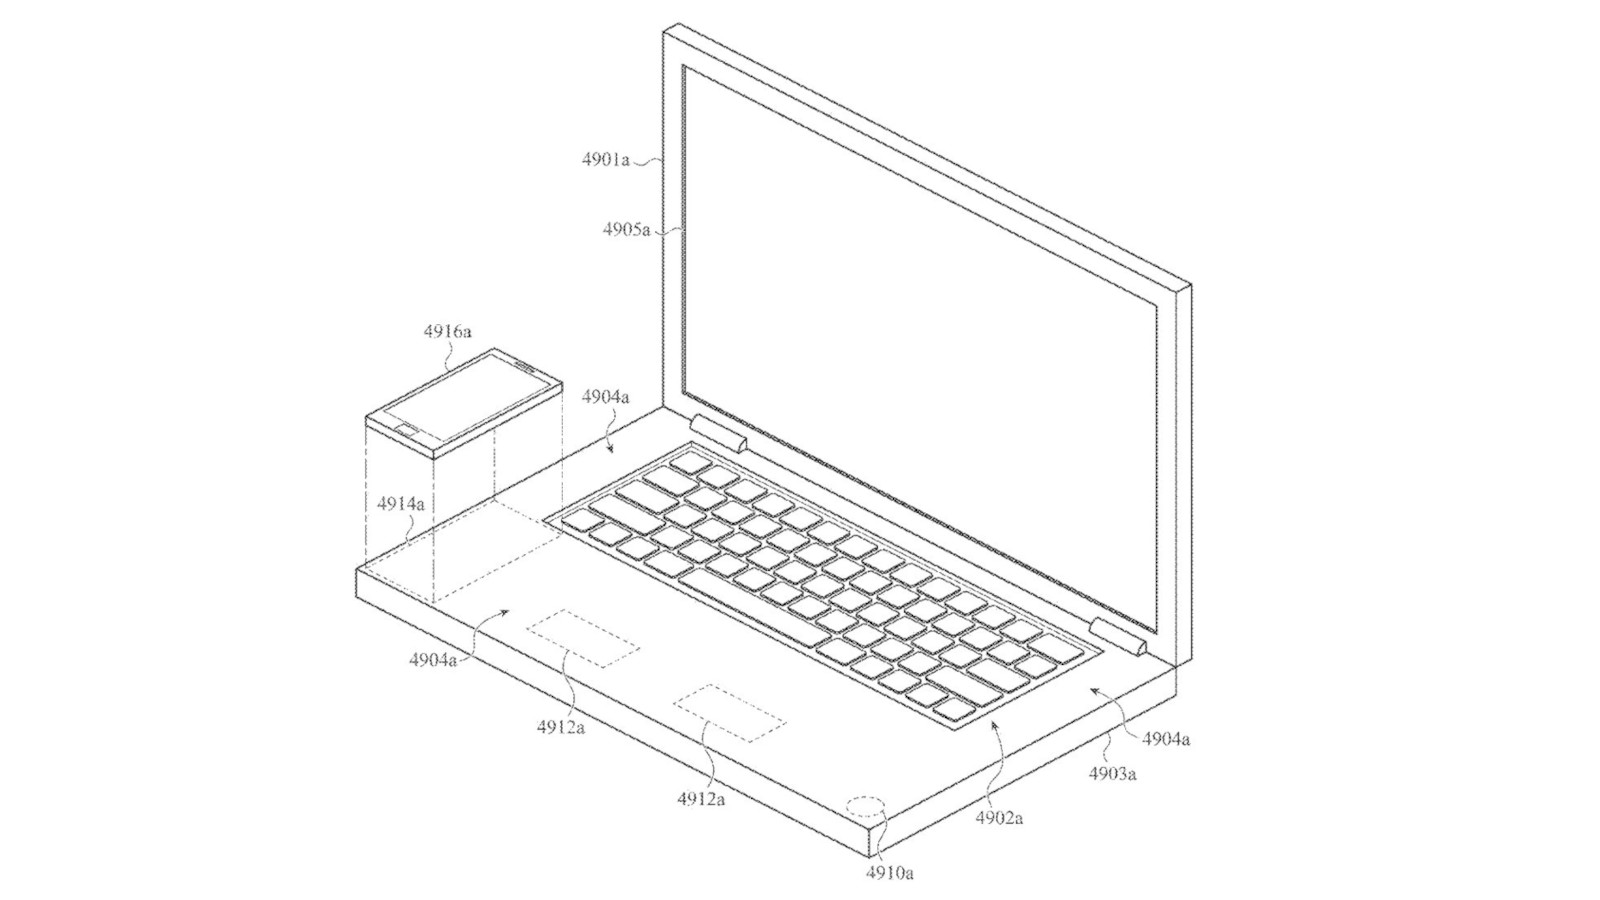 This Apple patent suggests new MacBook Pro designs could be pretty wild